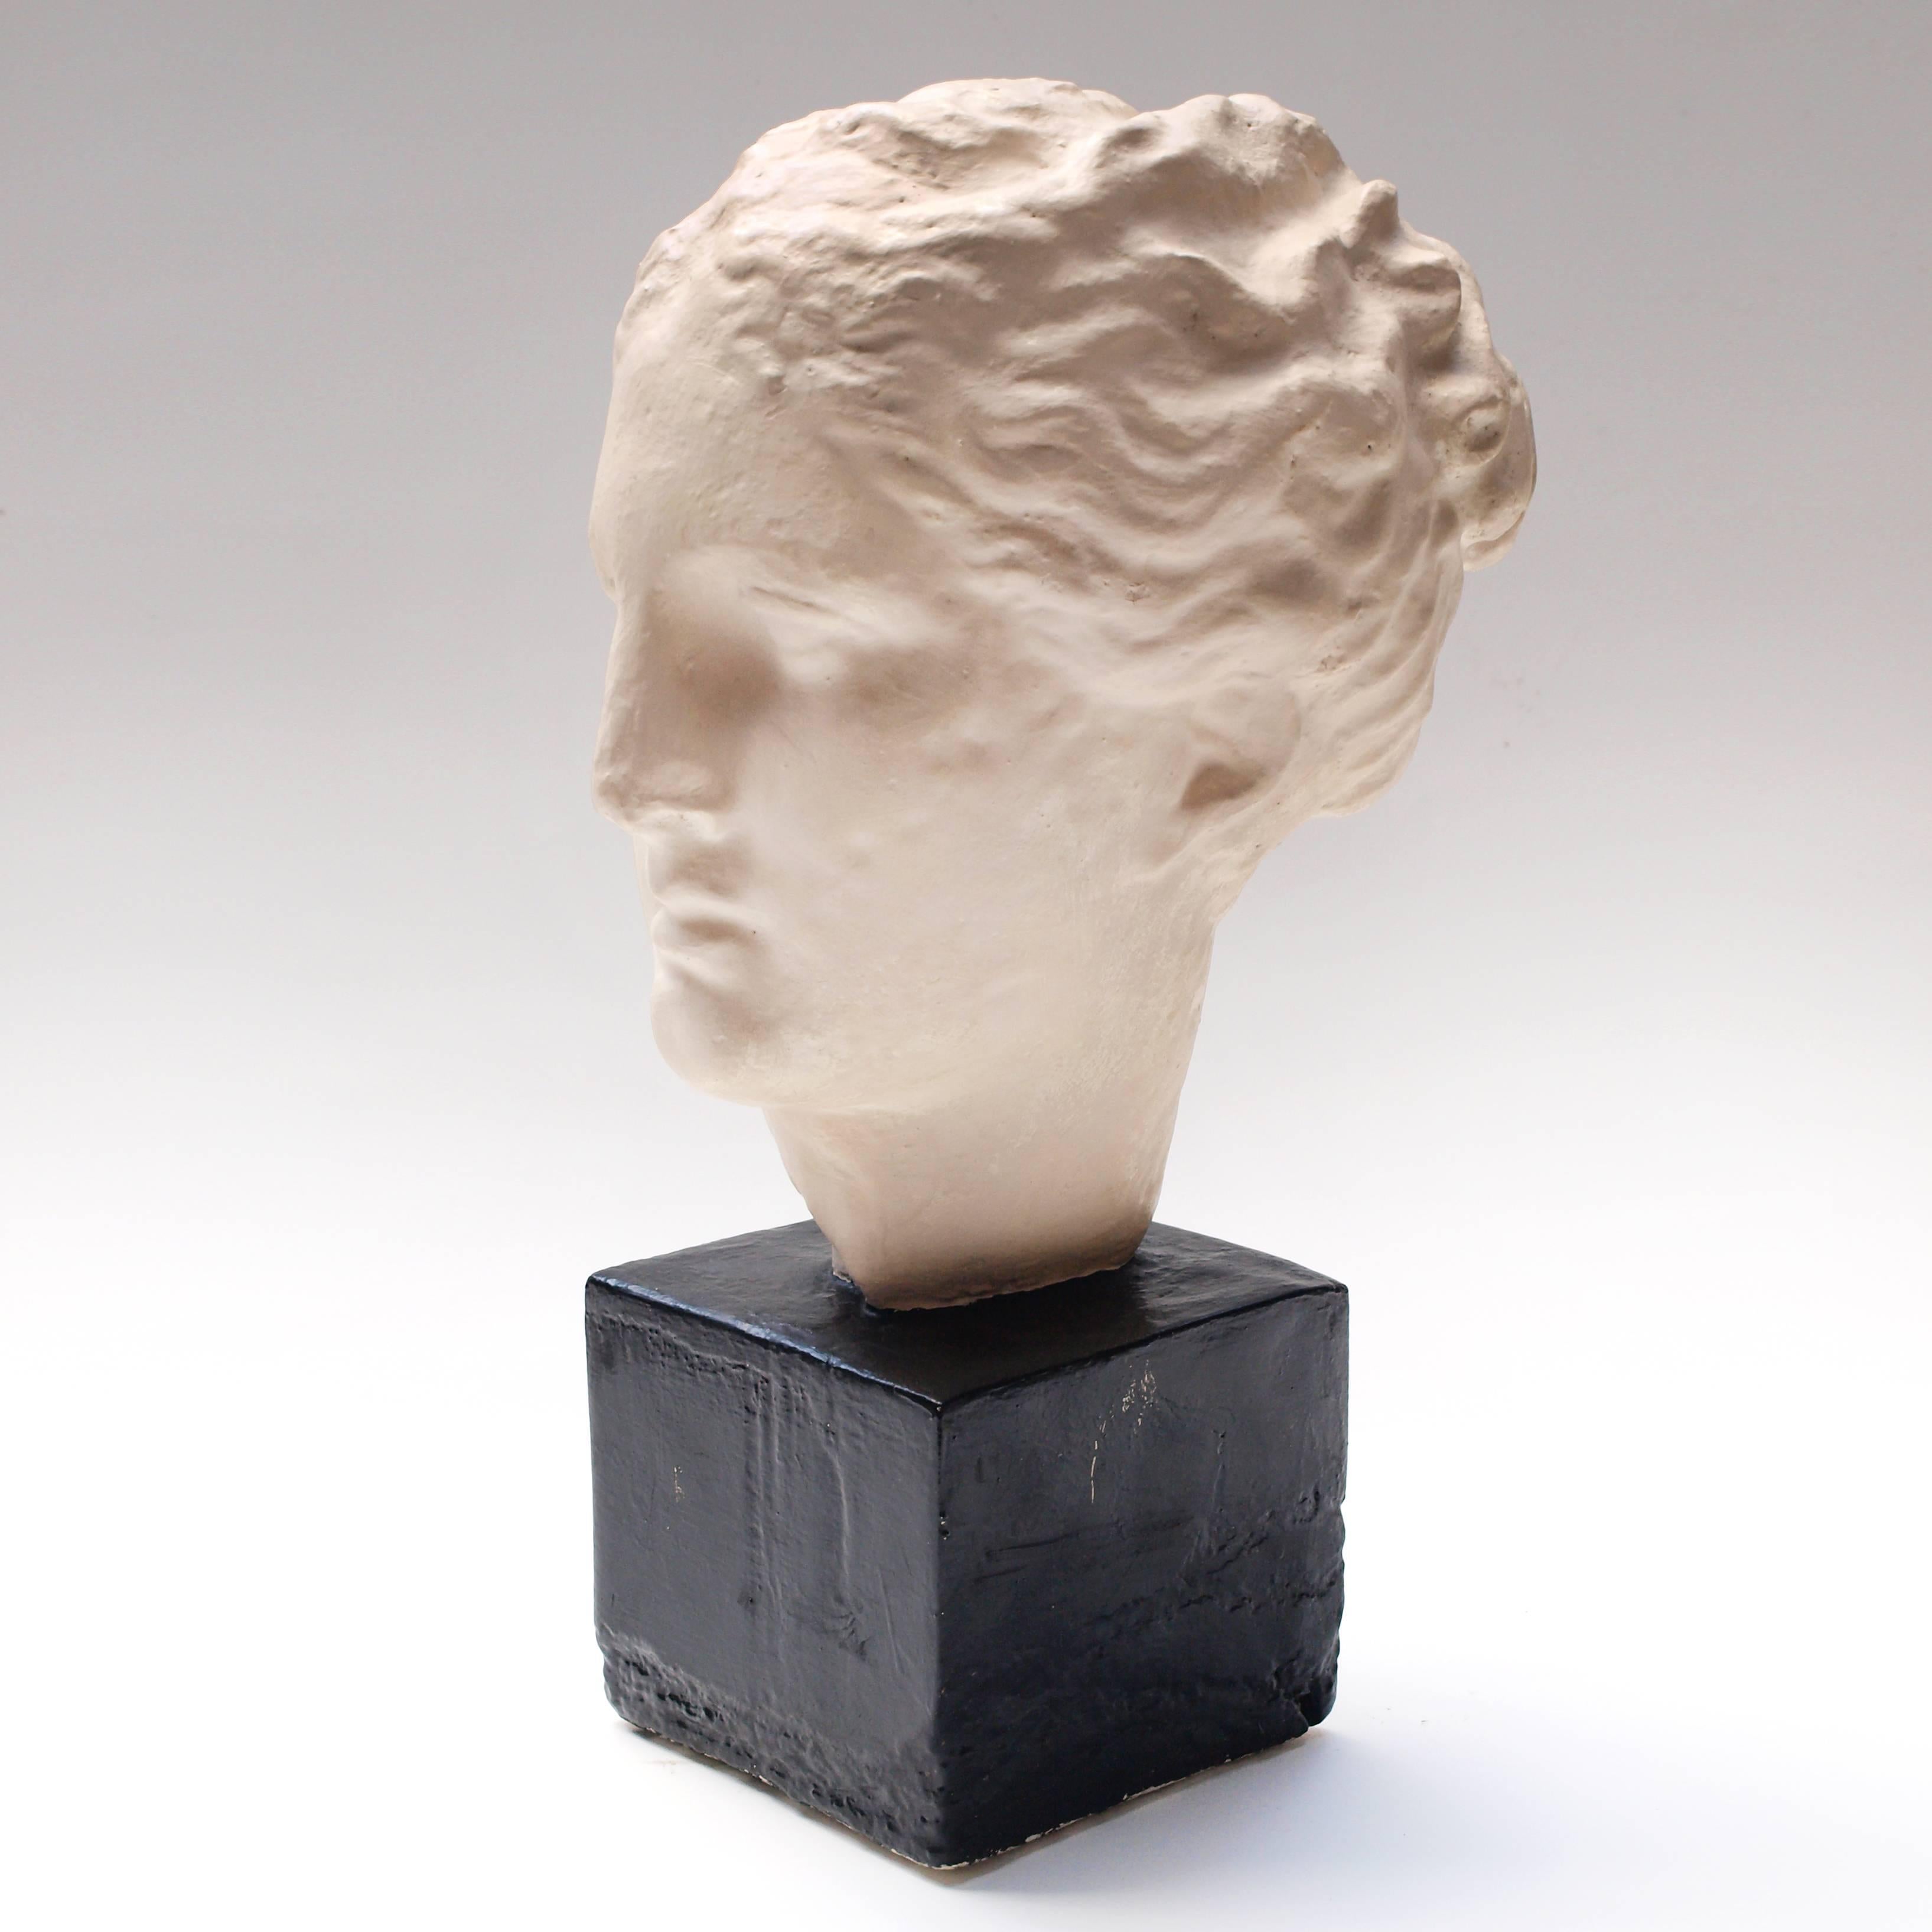 A highly decorative reproduction cast bust of a Roman Empress in sideways pose.